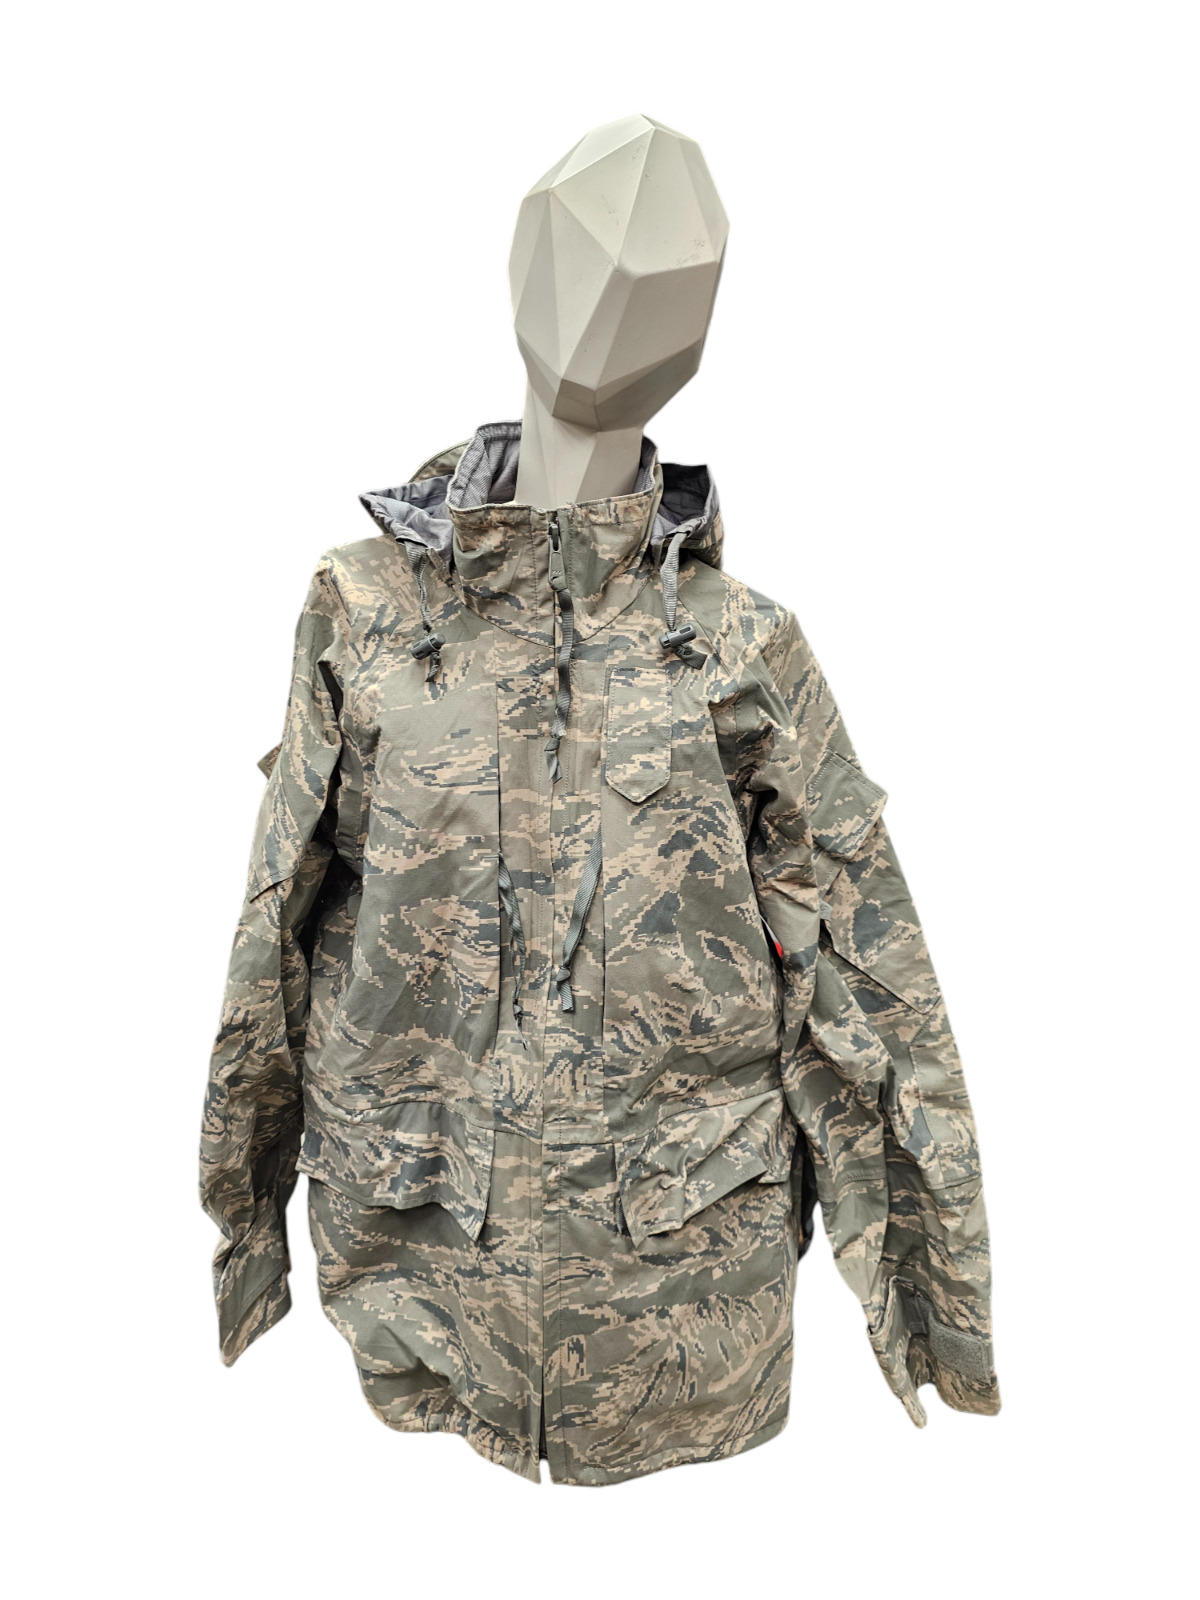 U.S. Armed Forces Air Force All Purpose Parka